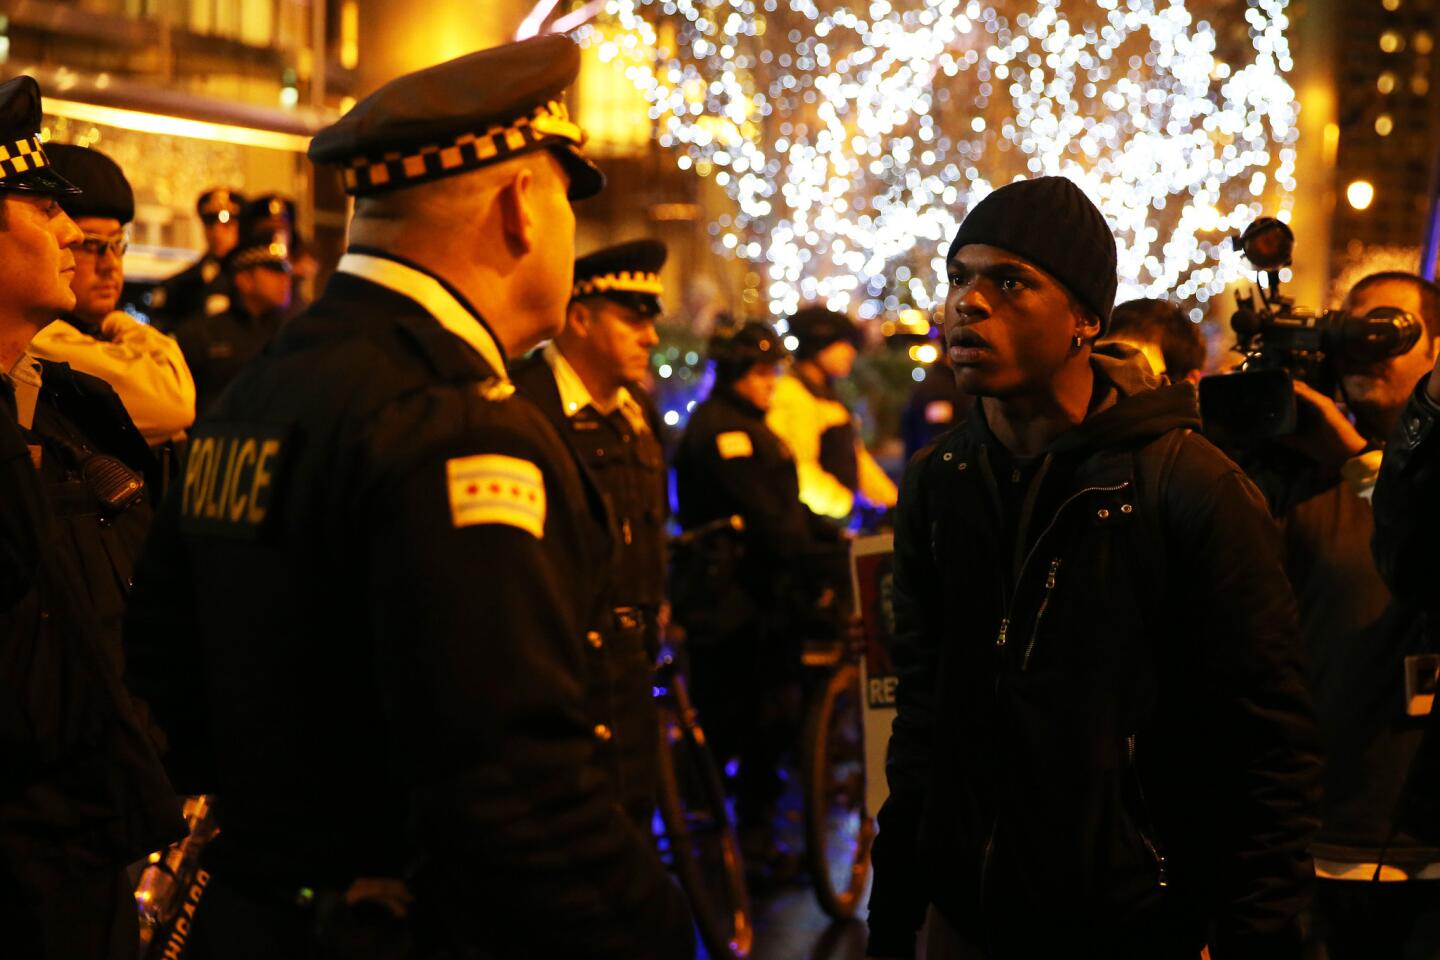 Confronting police